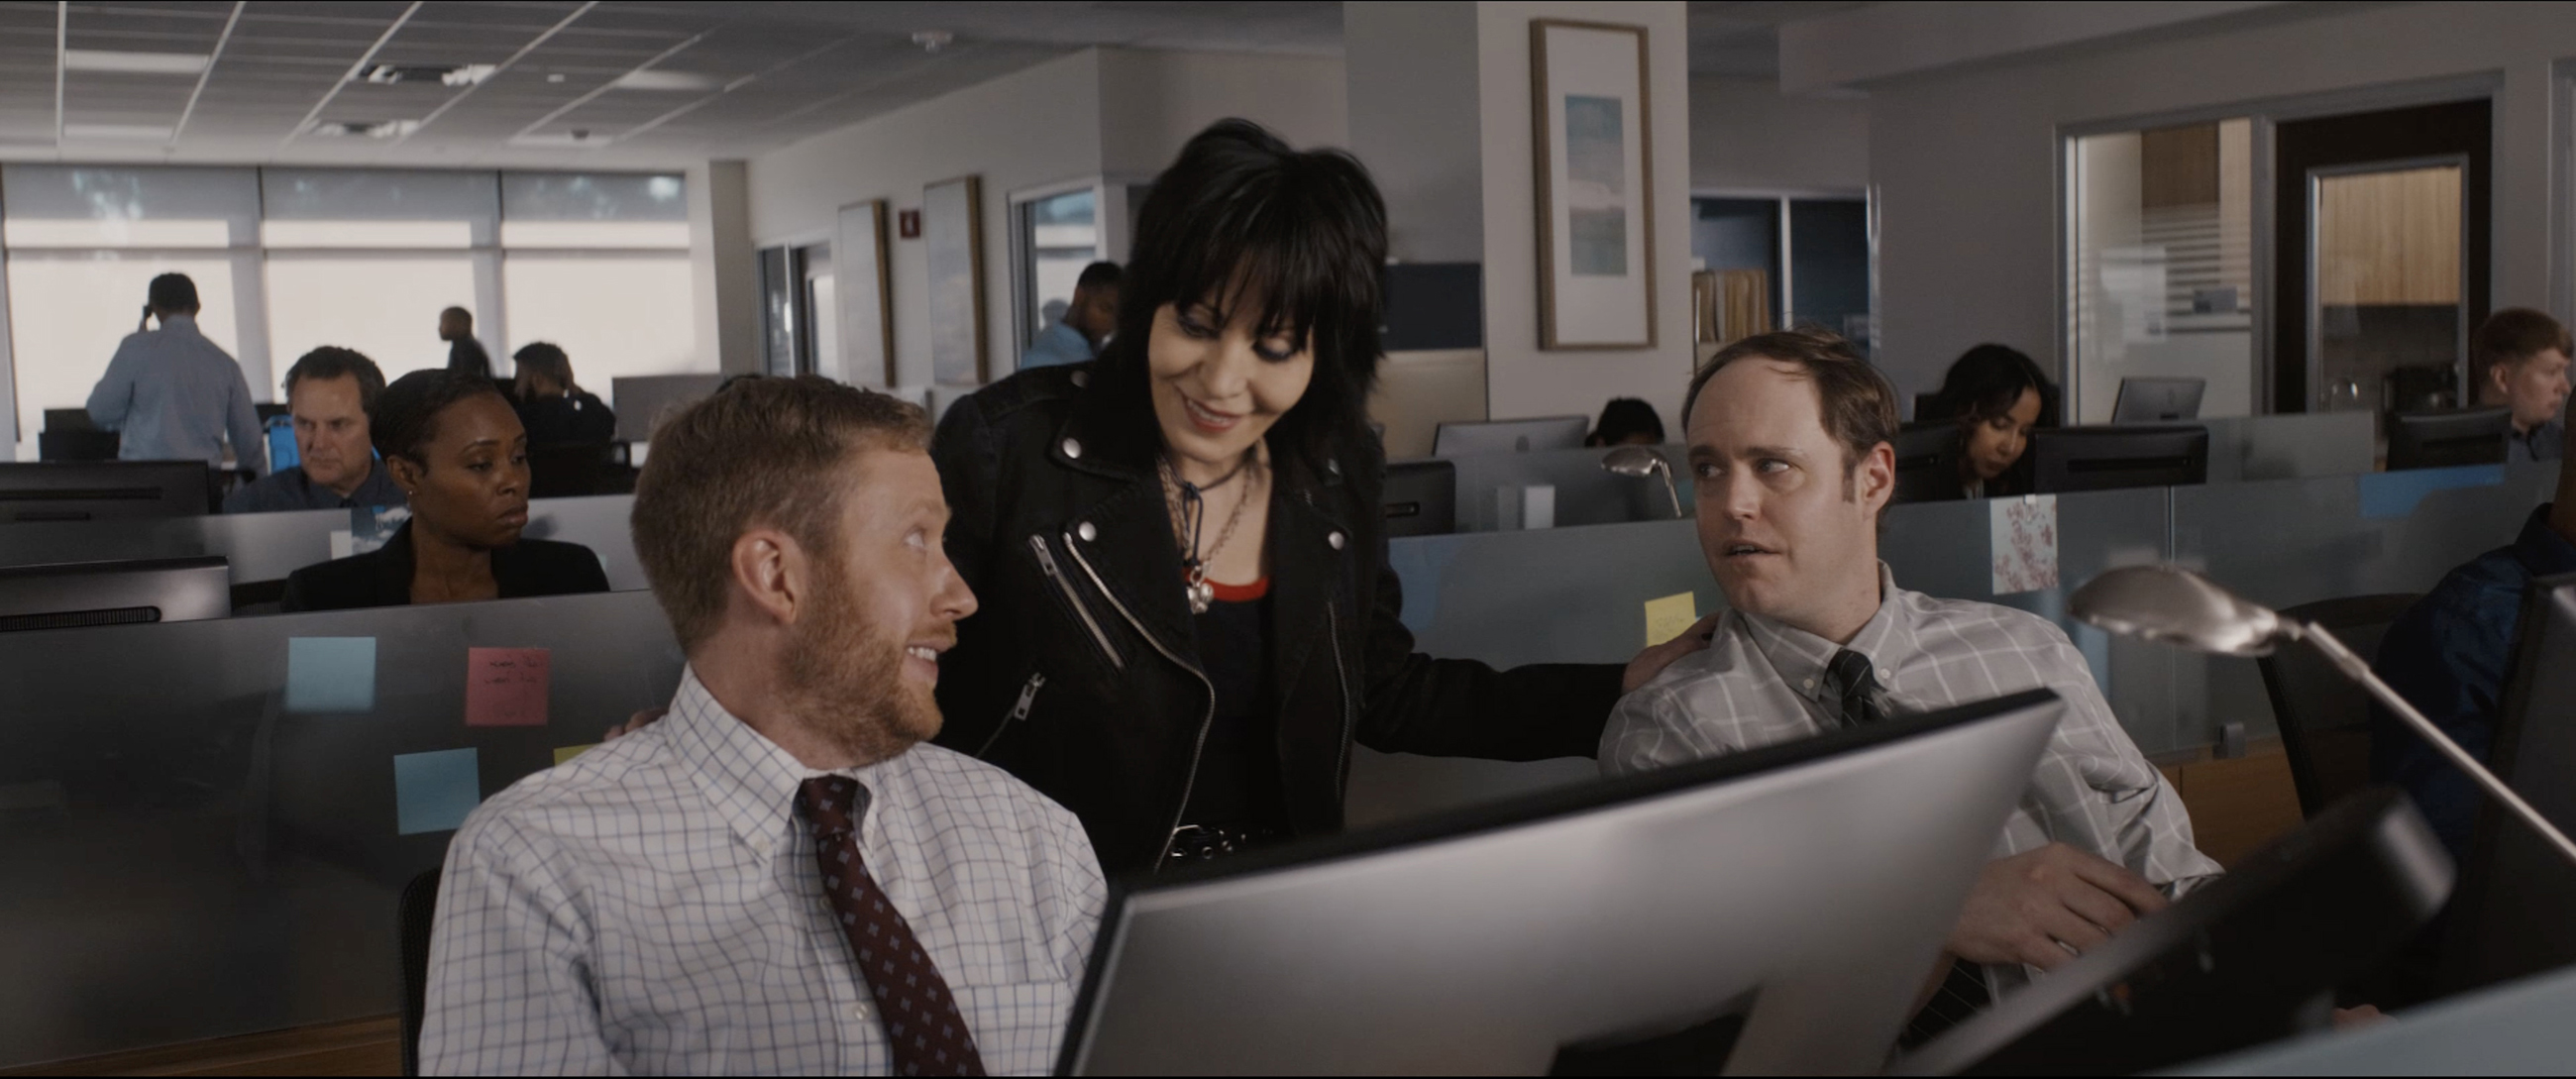 Joan Jett reminds corporate rock stars that she is the real rock star in the new Workday Big Game commercial teaser. Courtesy: Workday